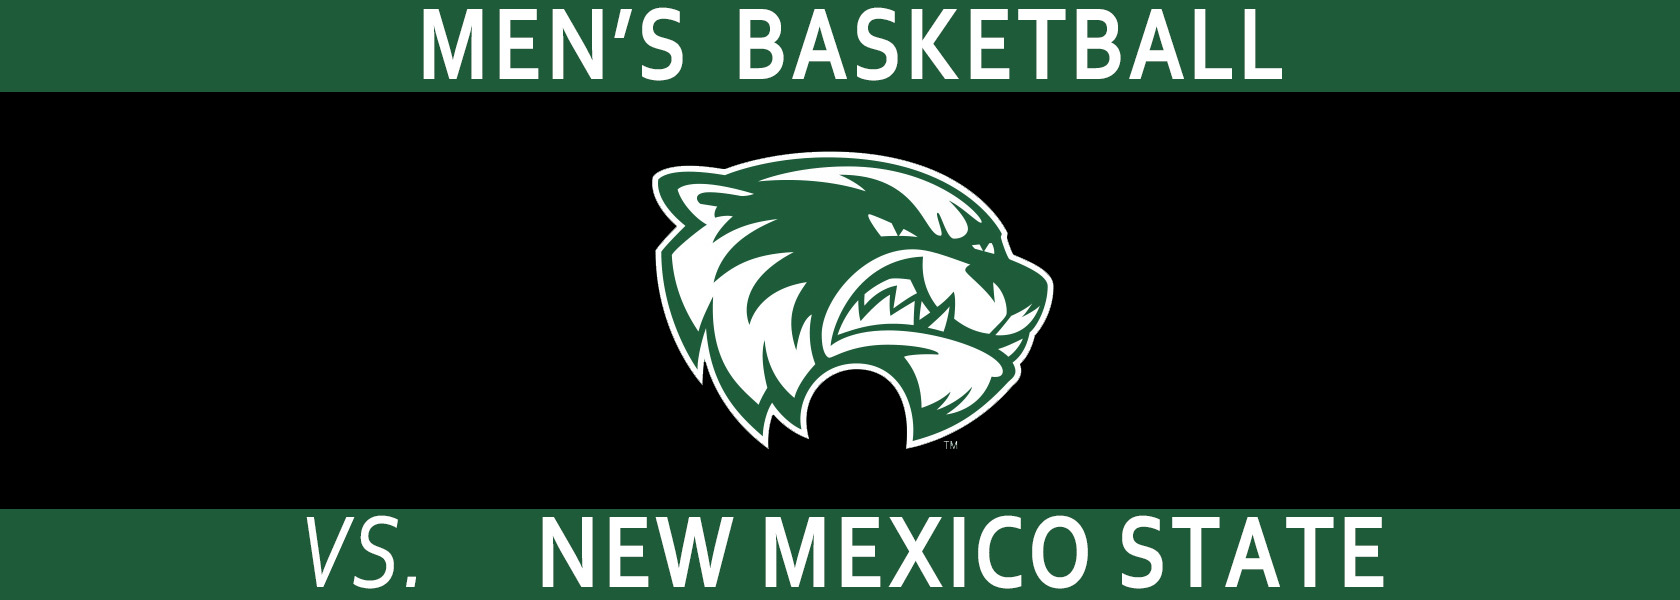 Men's Basketball  vs New Mexico State January 28 2023